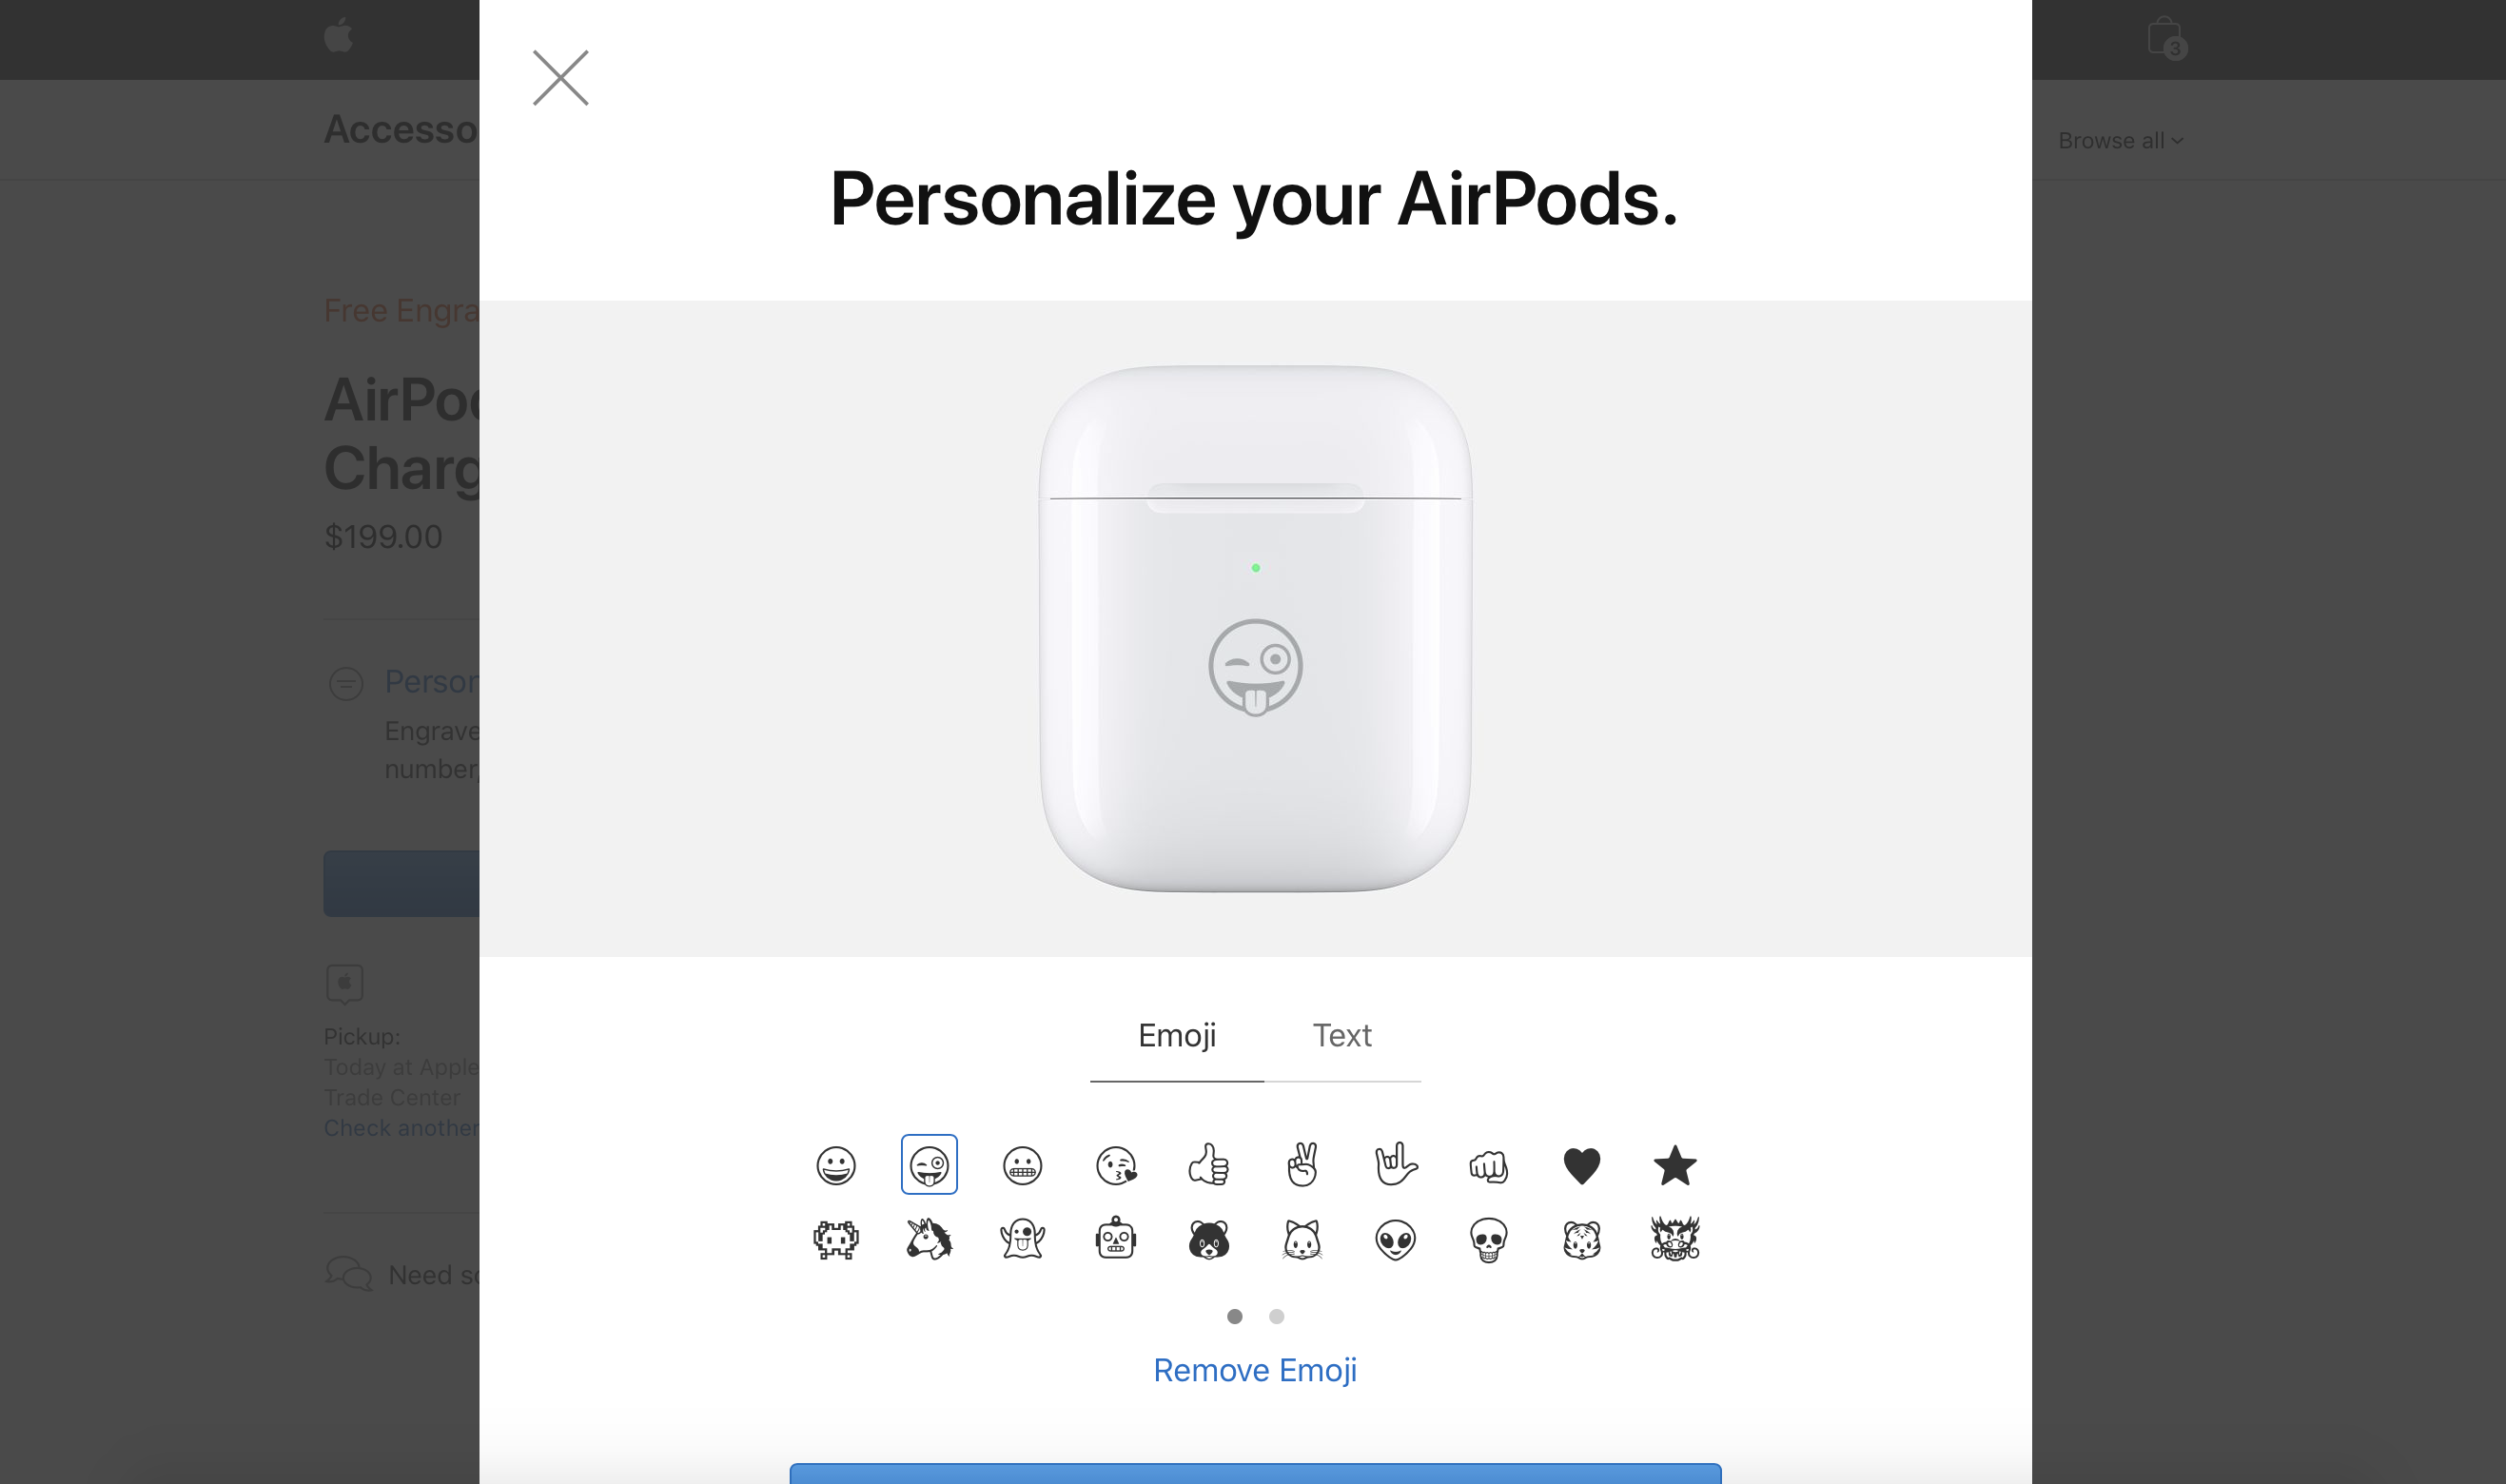 Размер кейса airpods. AIRPODS Pro 2 гравировка. Гравировка на AIRPODS 2. Размер эйрподс 2. Размеры кейса AIRPODS 2.